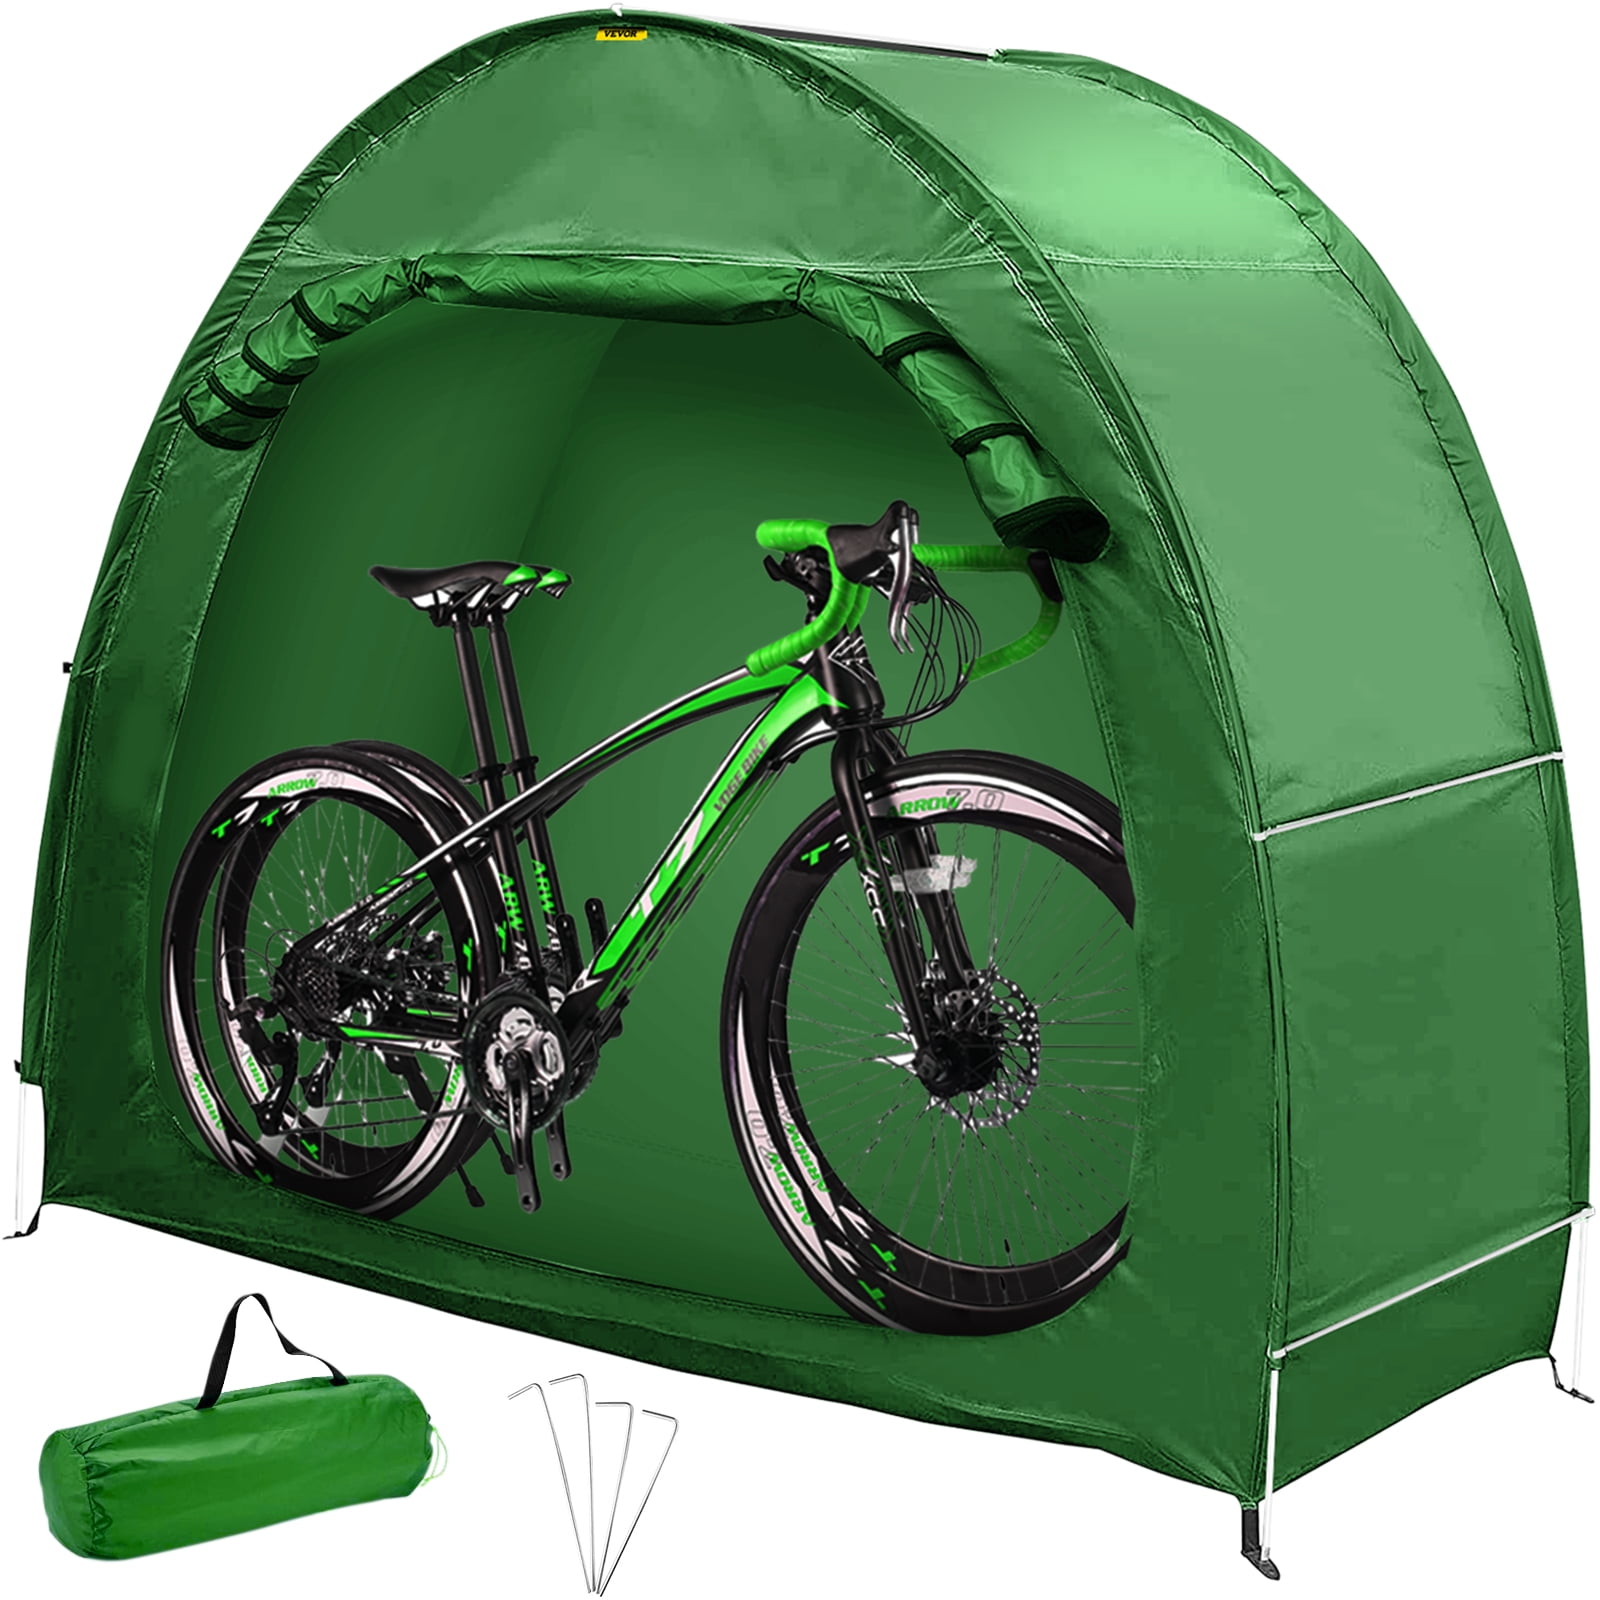 H&ZT Large Bike Storage Shed Tent Outdoor Waterproof Bike Tent for 2 Bikes Heavy Duty Tricycle Storage Tent Bike Shelter Space Saving 